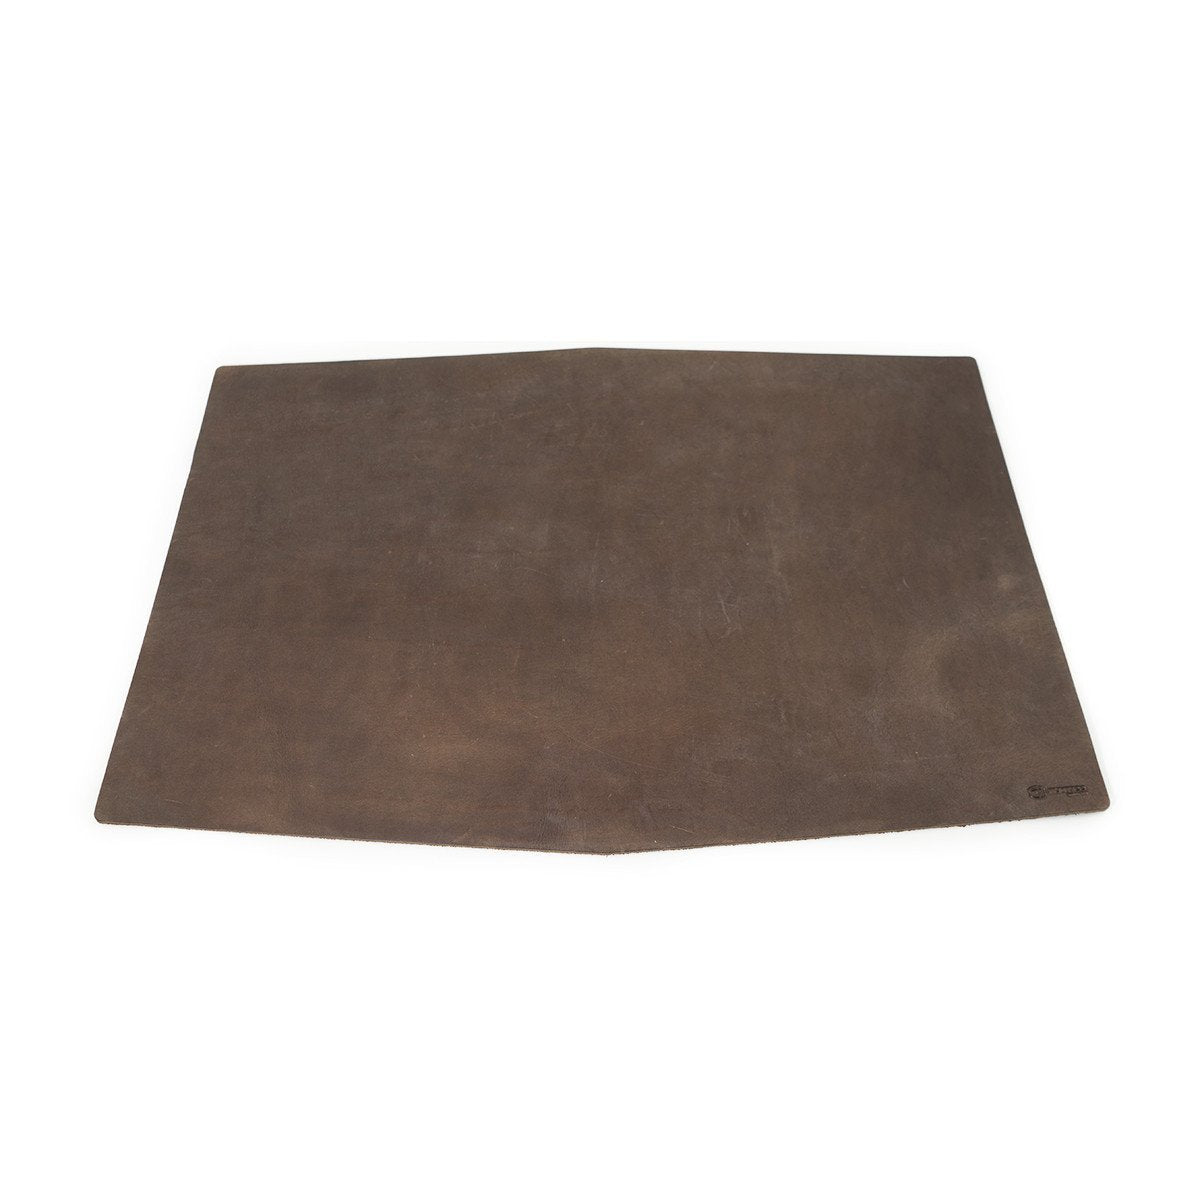 Basecamp Leather Mouse Pad